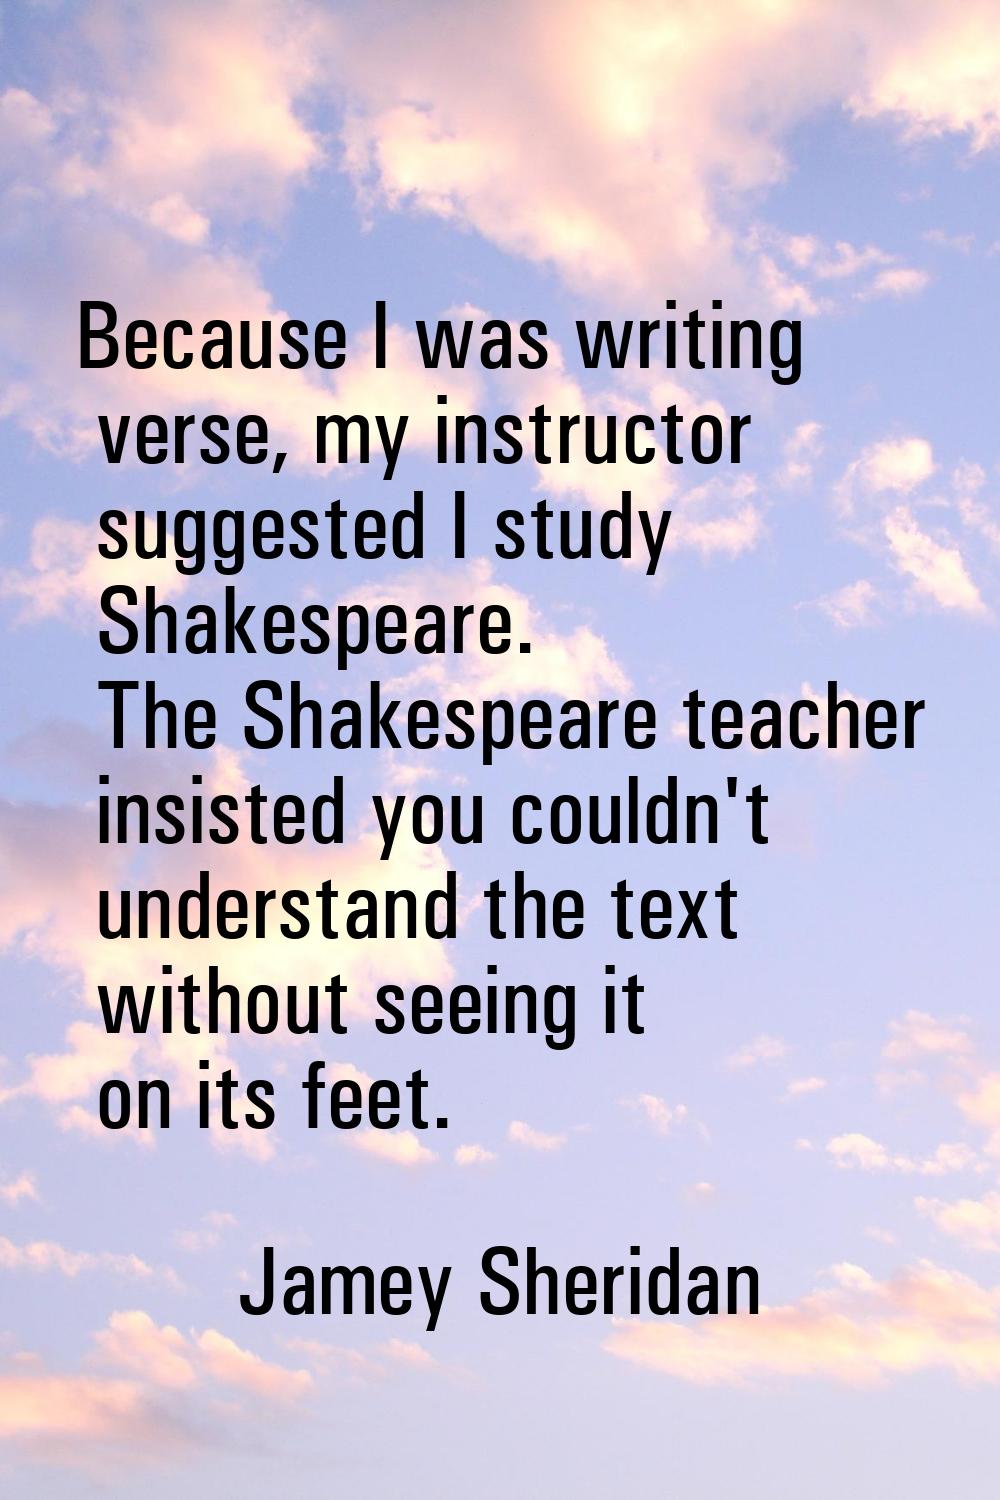 Because I was writing verse, my instructor suggested I study Shakespeare. The Shakespeare teacher i